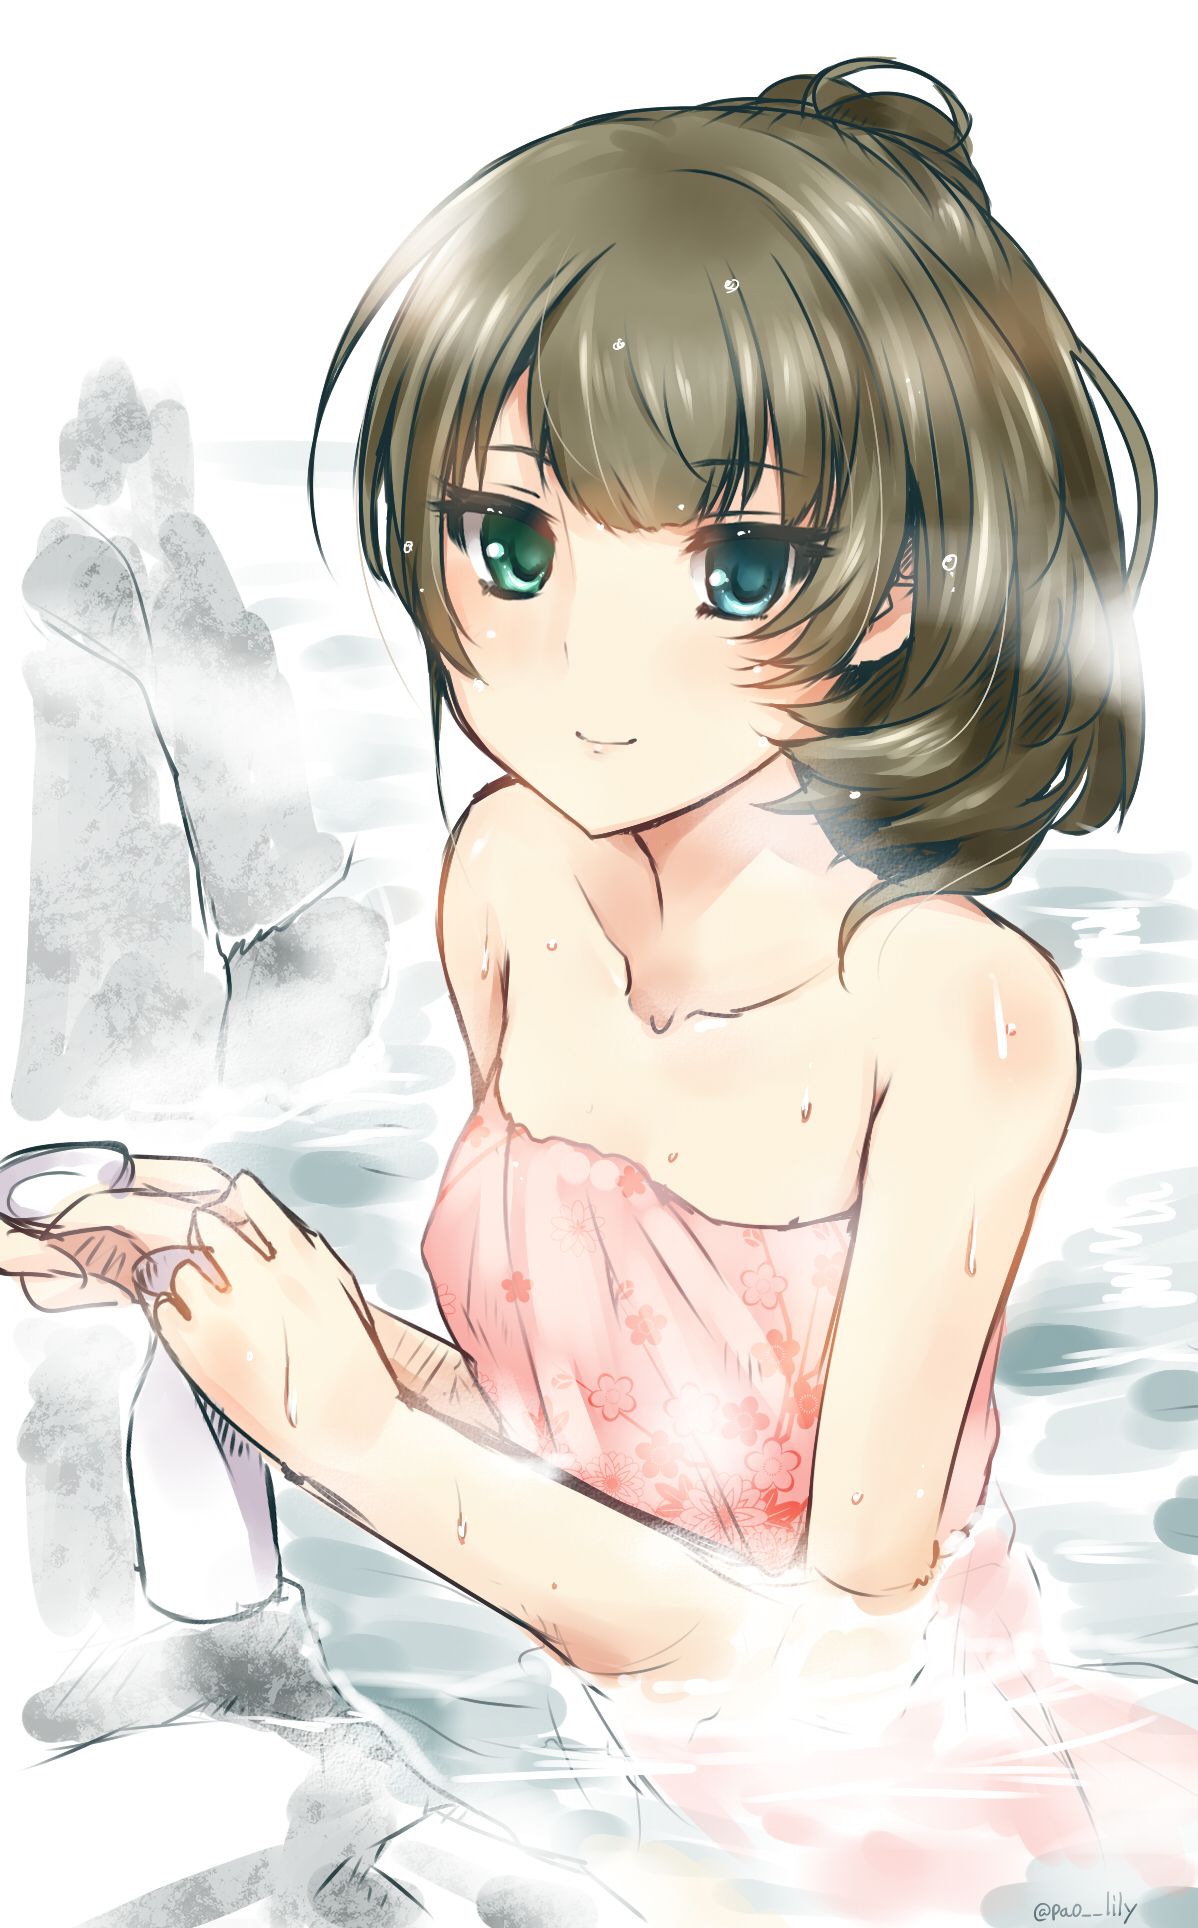 TAKAGAKI Kaede (deremas) and hot springs that expedite the delusion in erotic images. 16